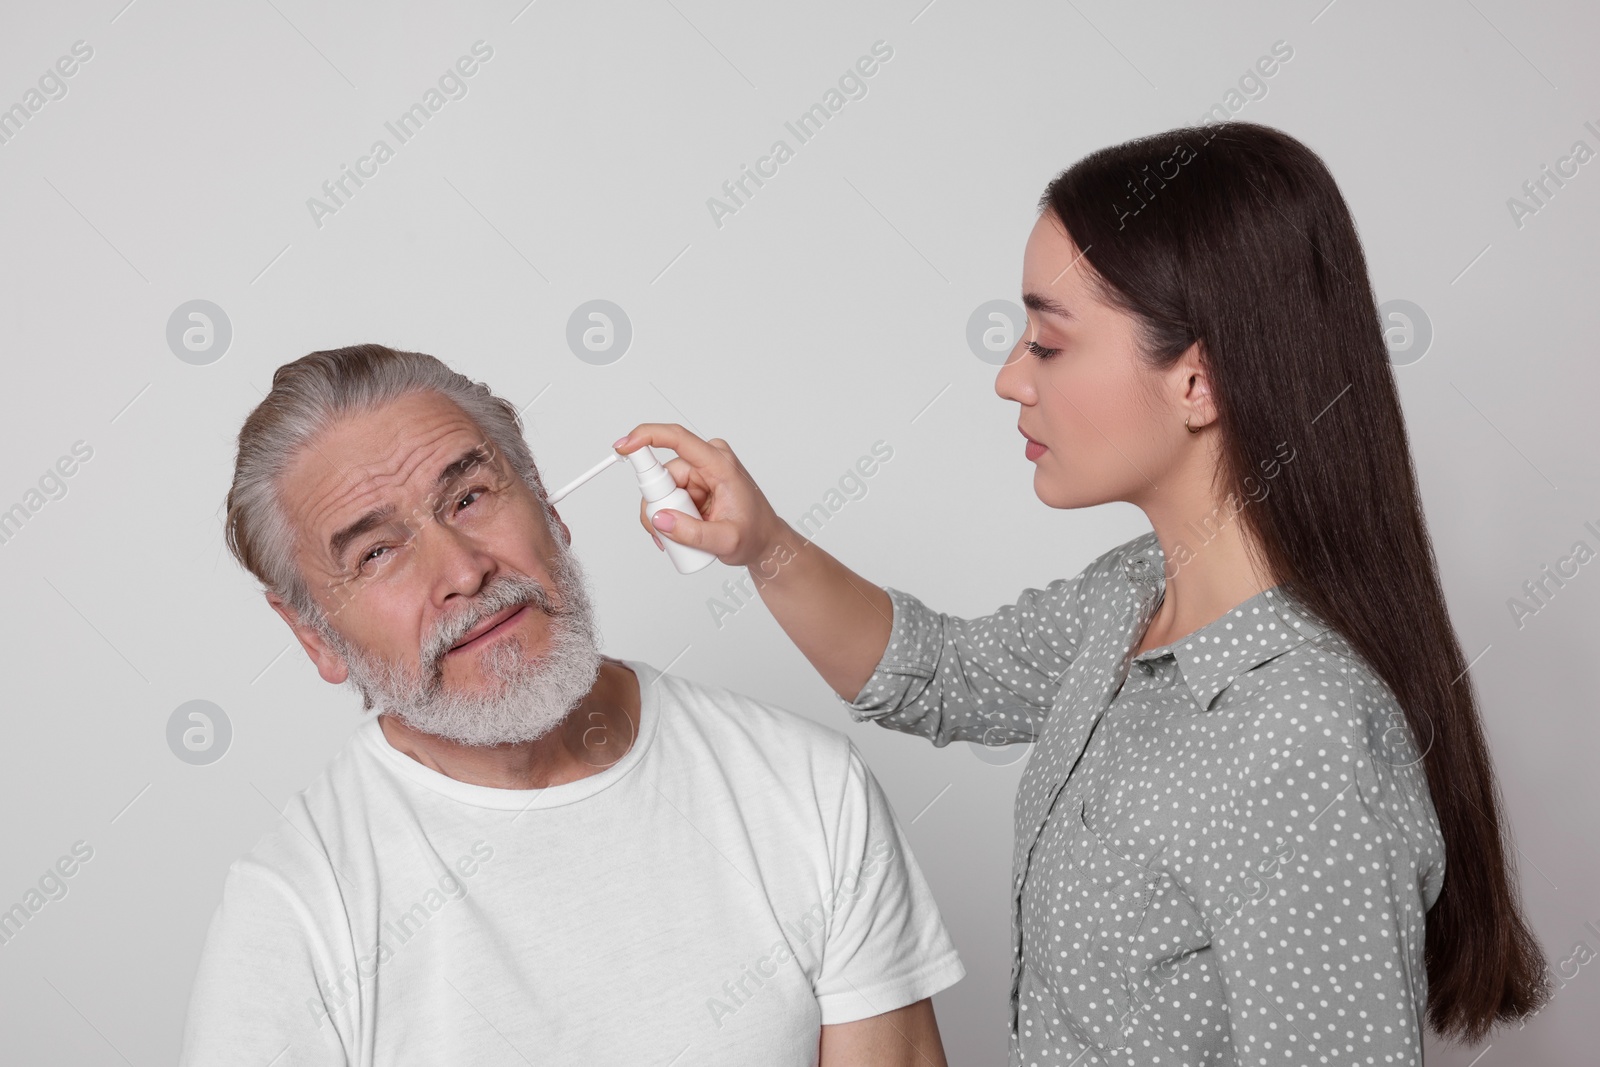 Photo of Young woman spraying medication into man's ear on white background